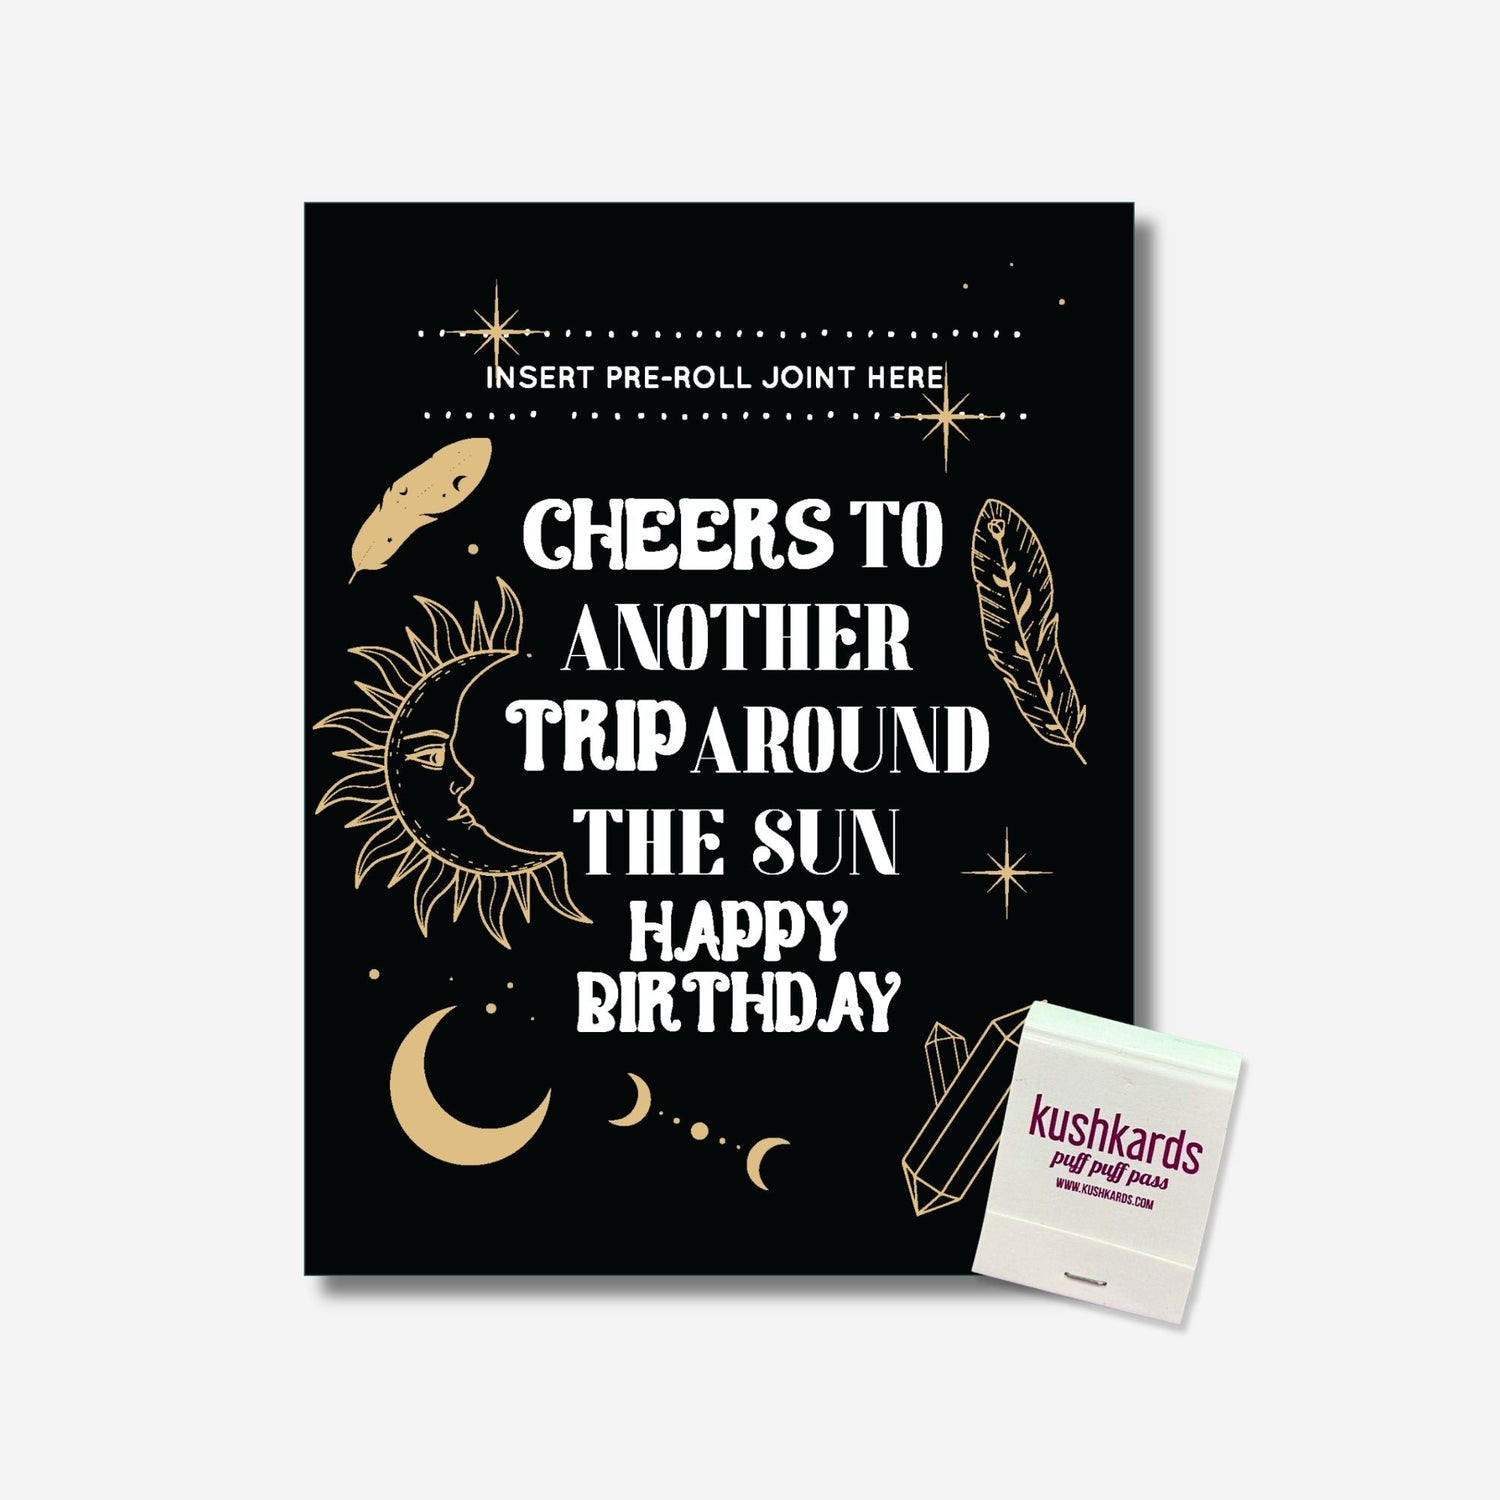 Cheers to another trip around the sun Happy Birthday&quot; Celestial-themed greeting card on recycled paper with sun, moon, and crystal illustrations